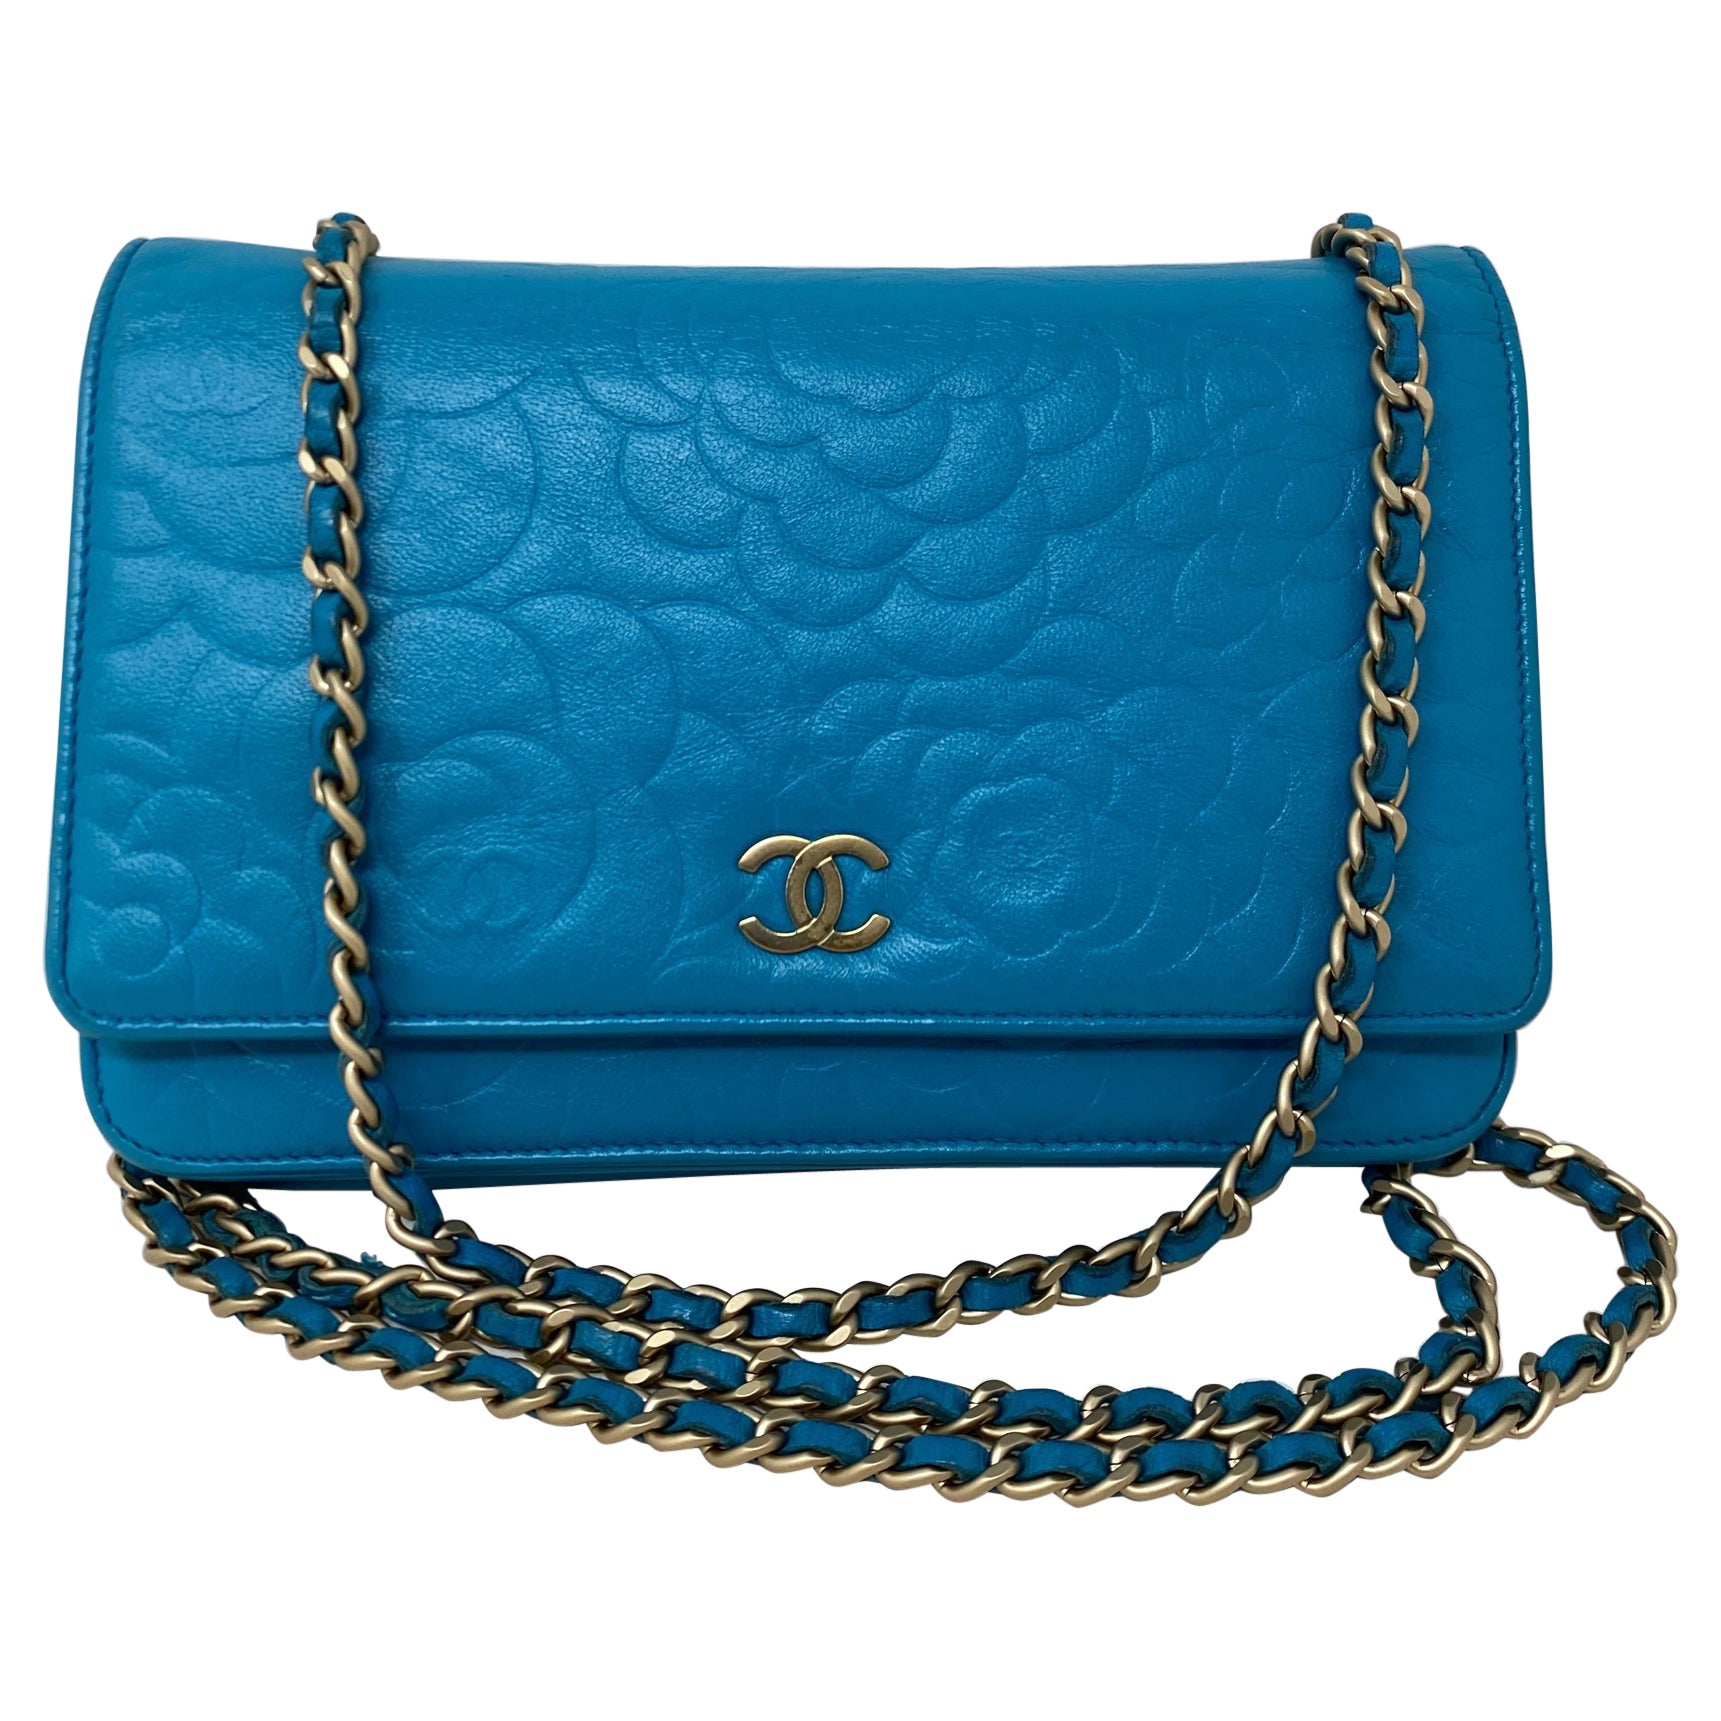 Chanel Teal Wallet On A Chain Bag 